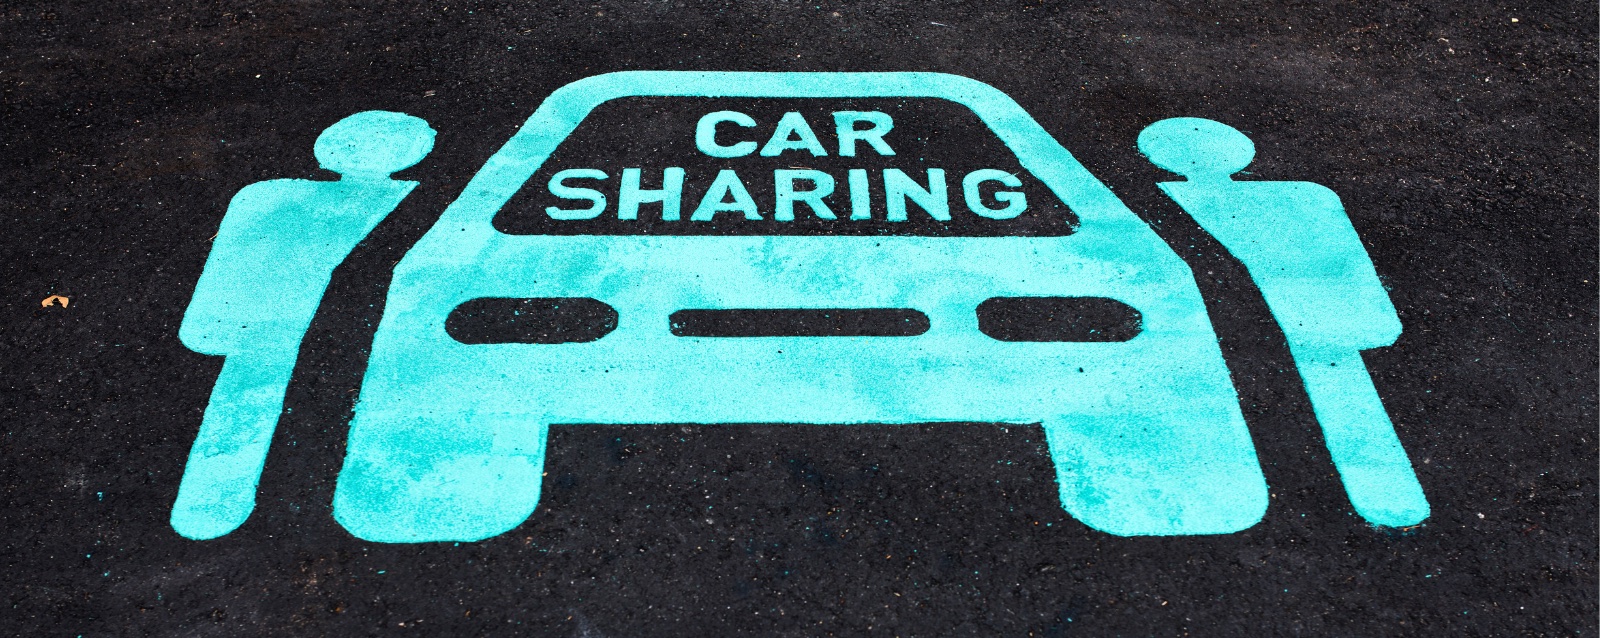 Two people and a car painted on asphalt signifying a car share vehicle